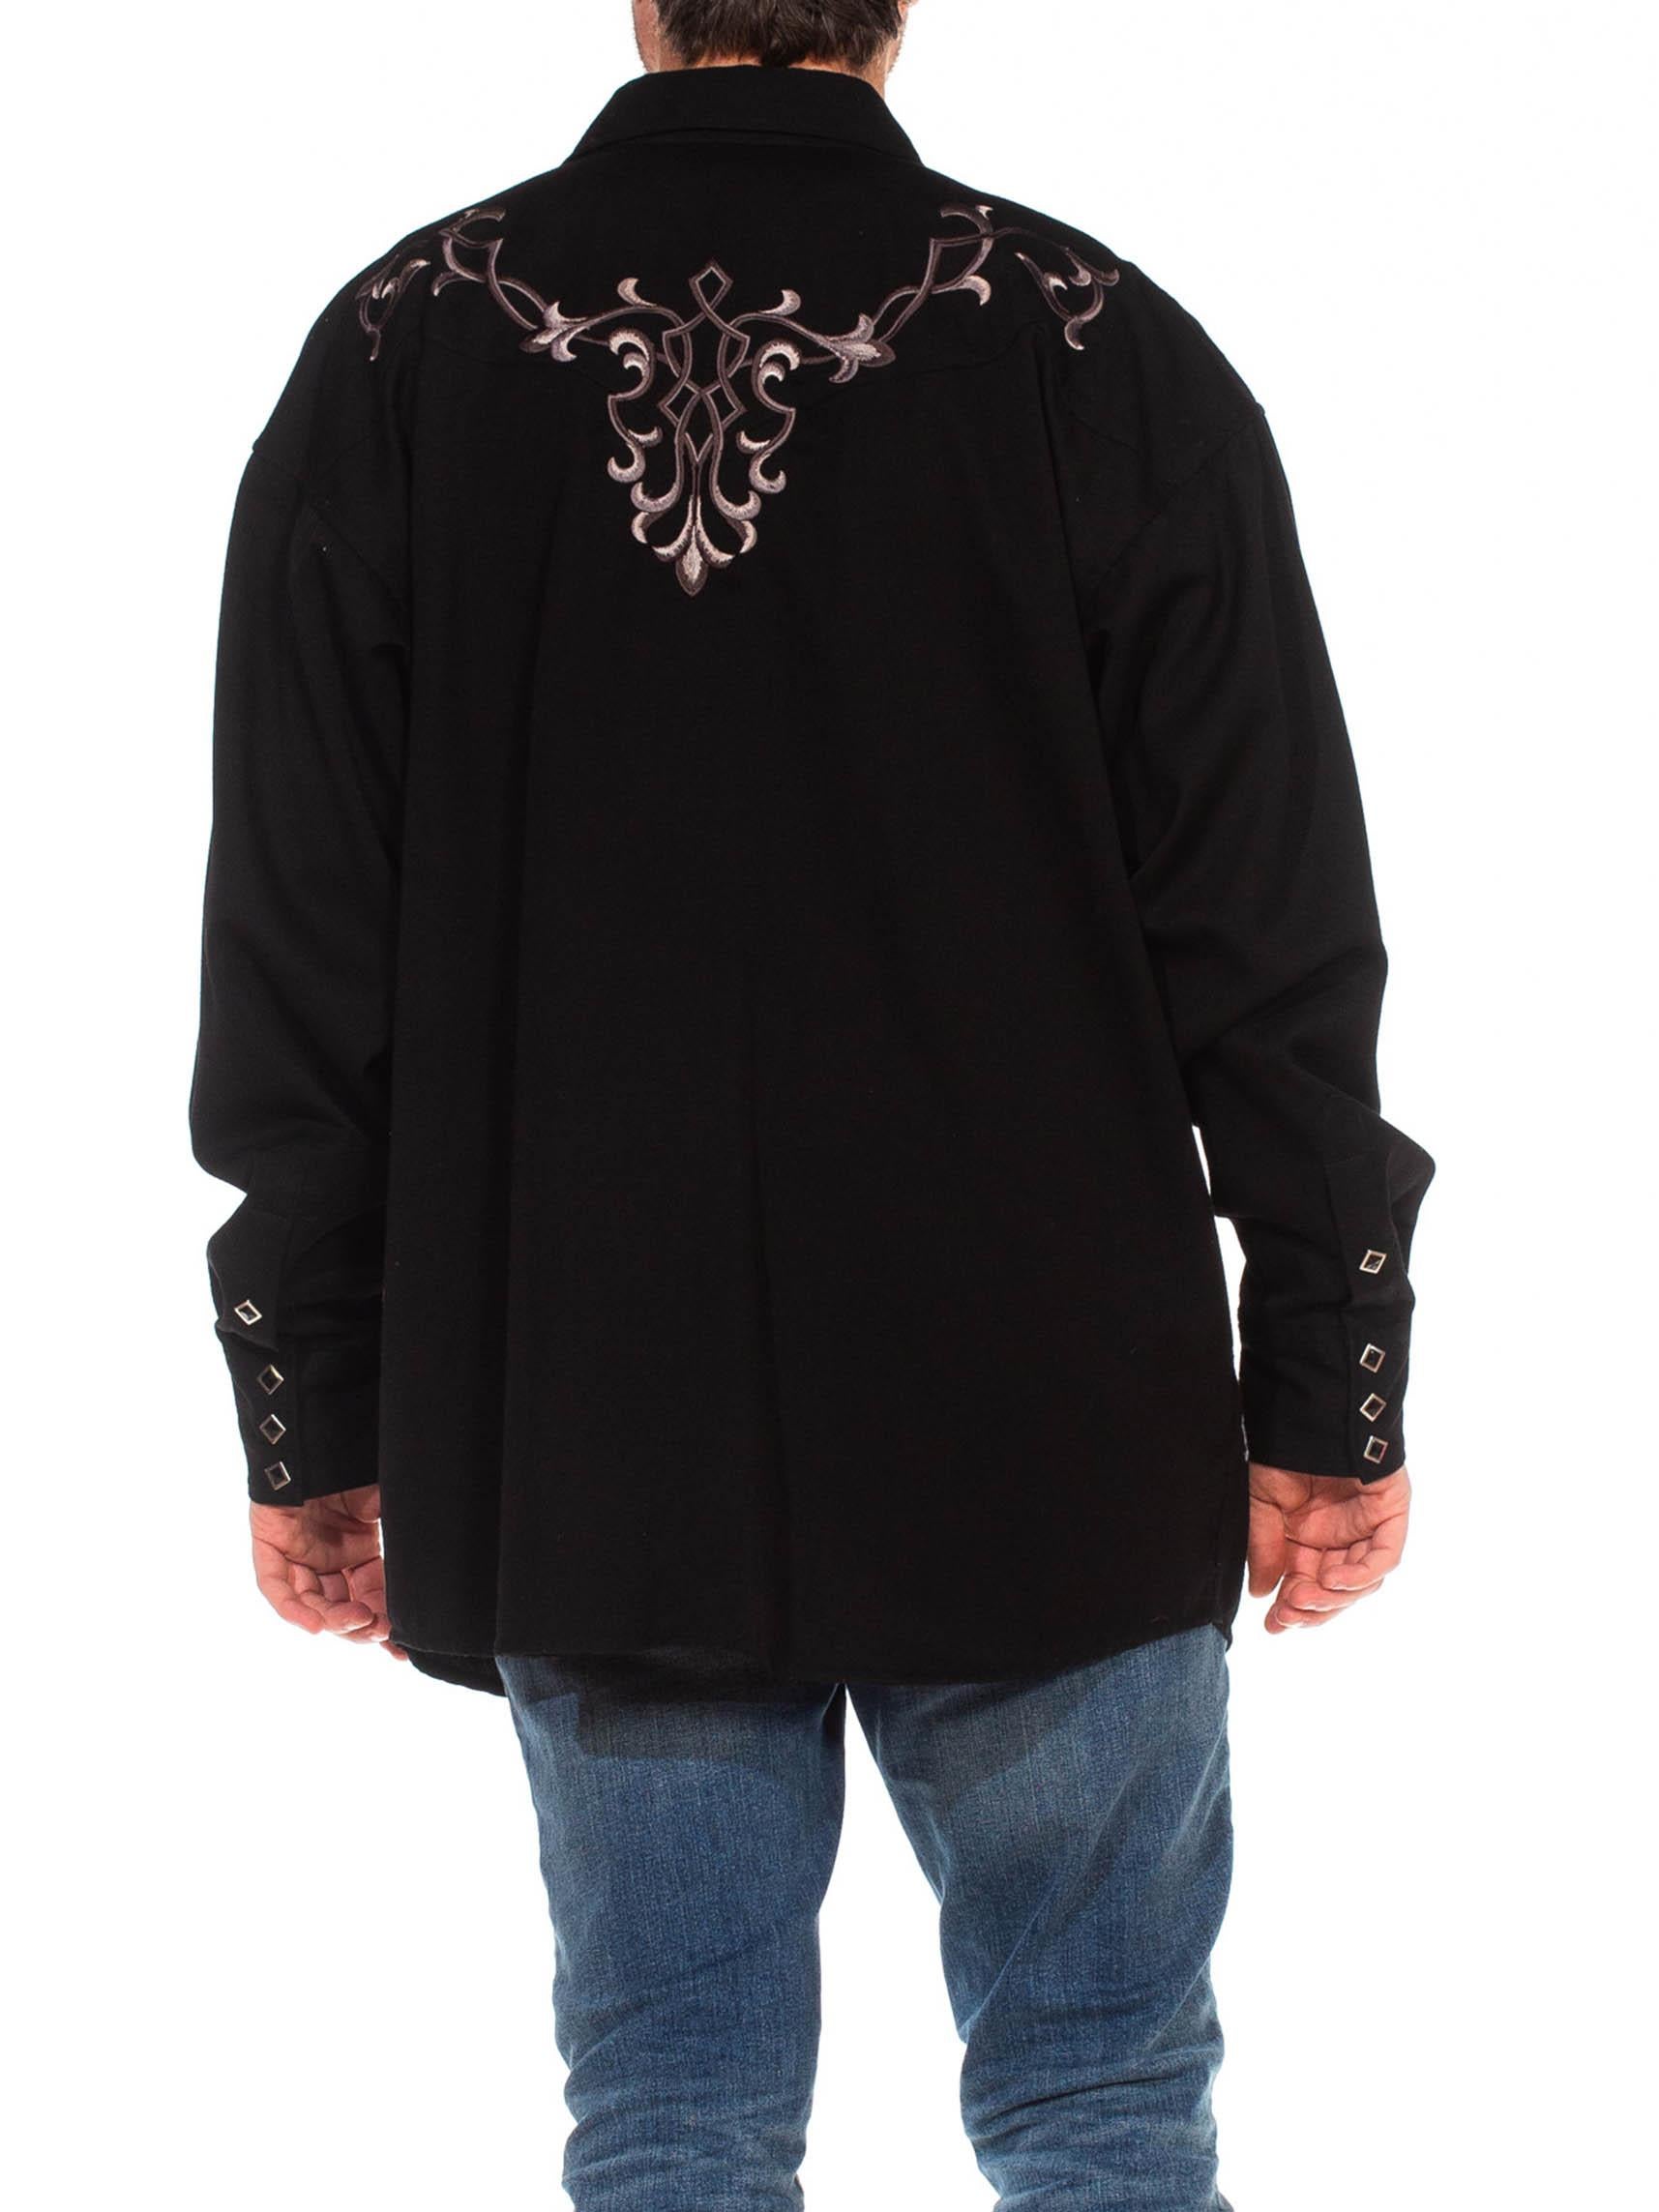 1990S Black Poly/Rayon Embroidered Goth Western Men's Shirt For Sale 3